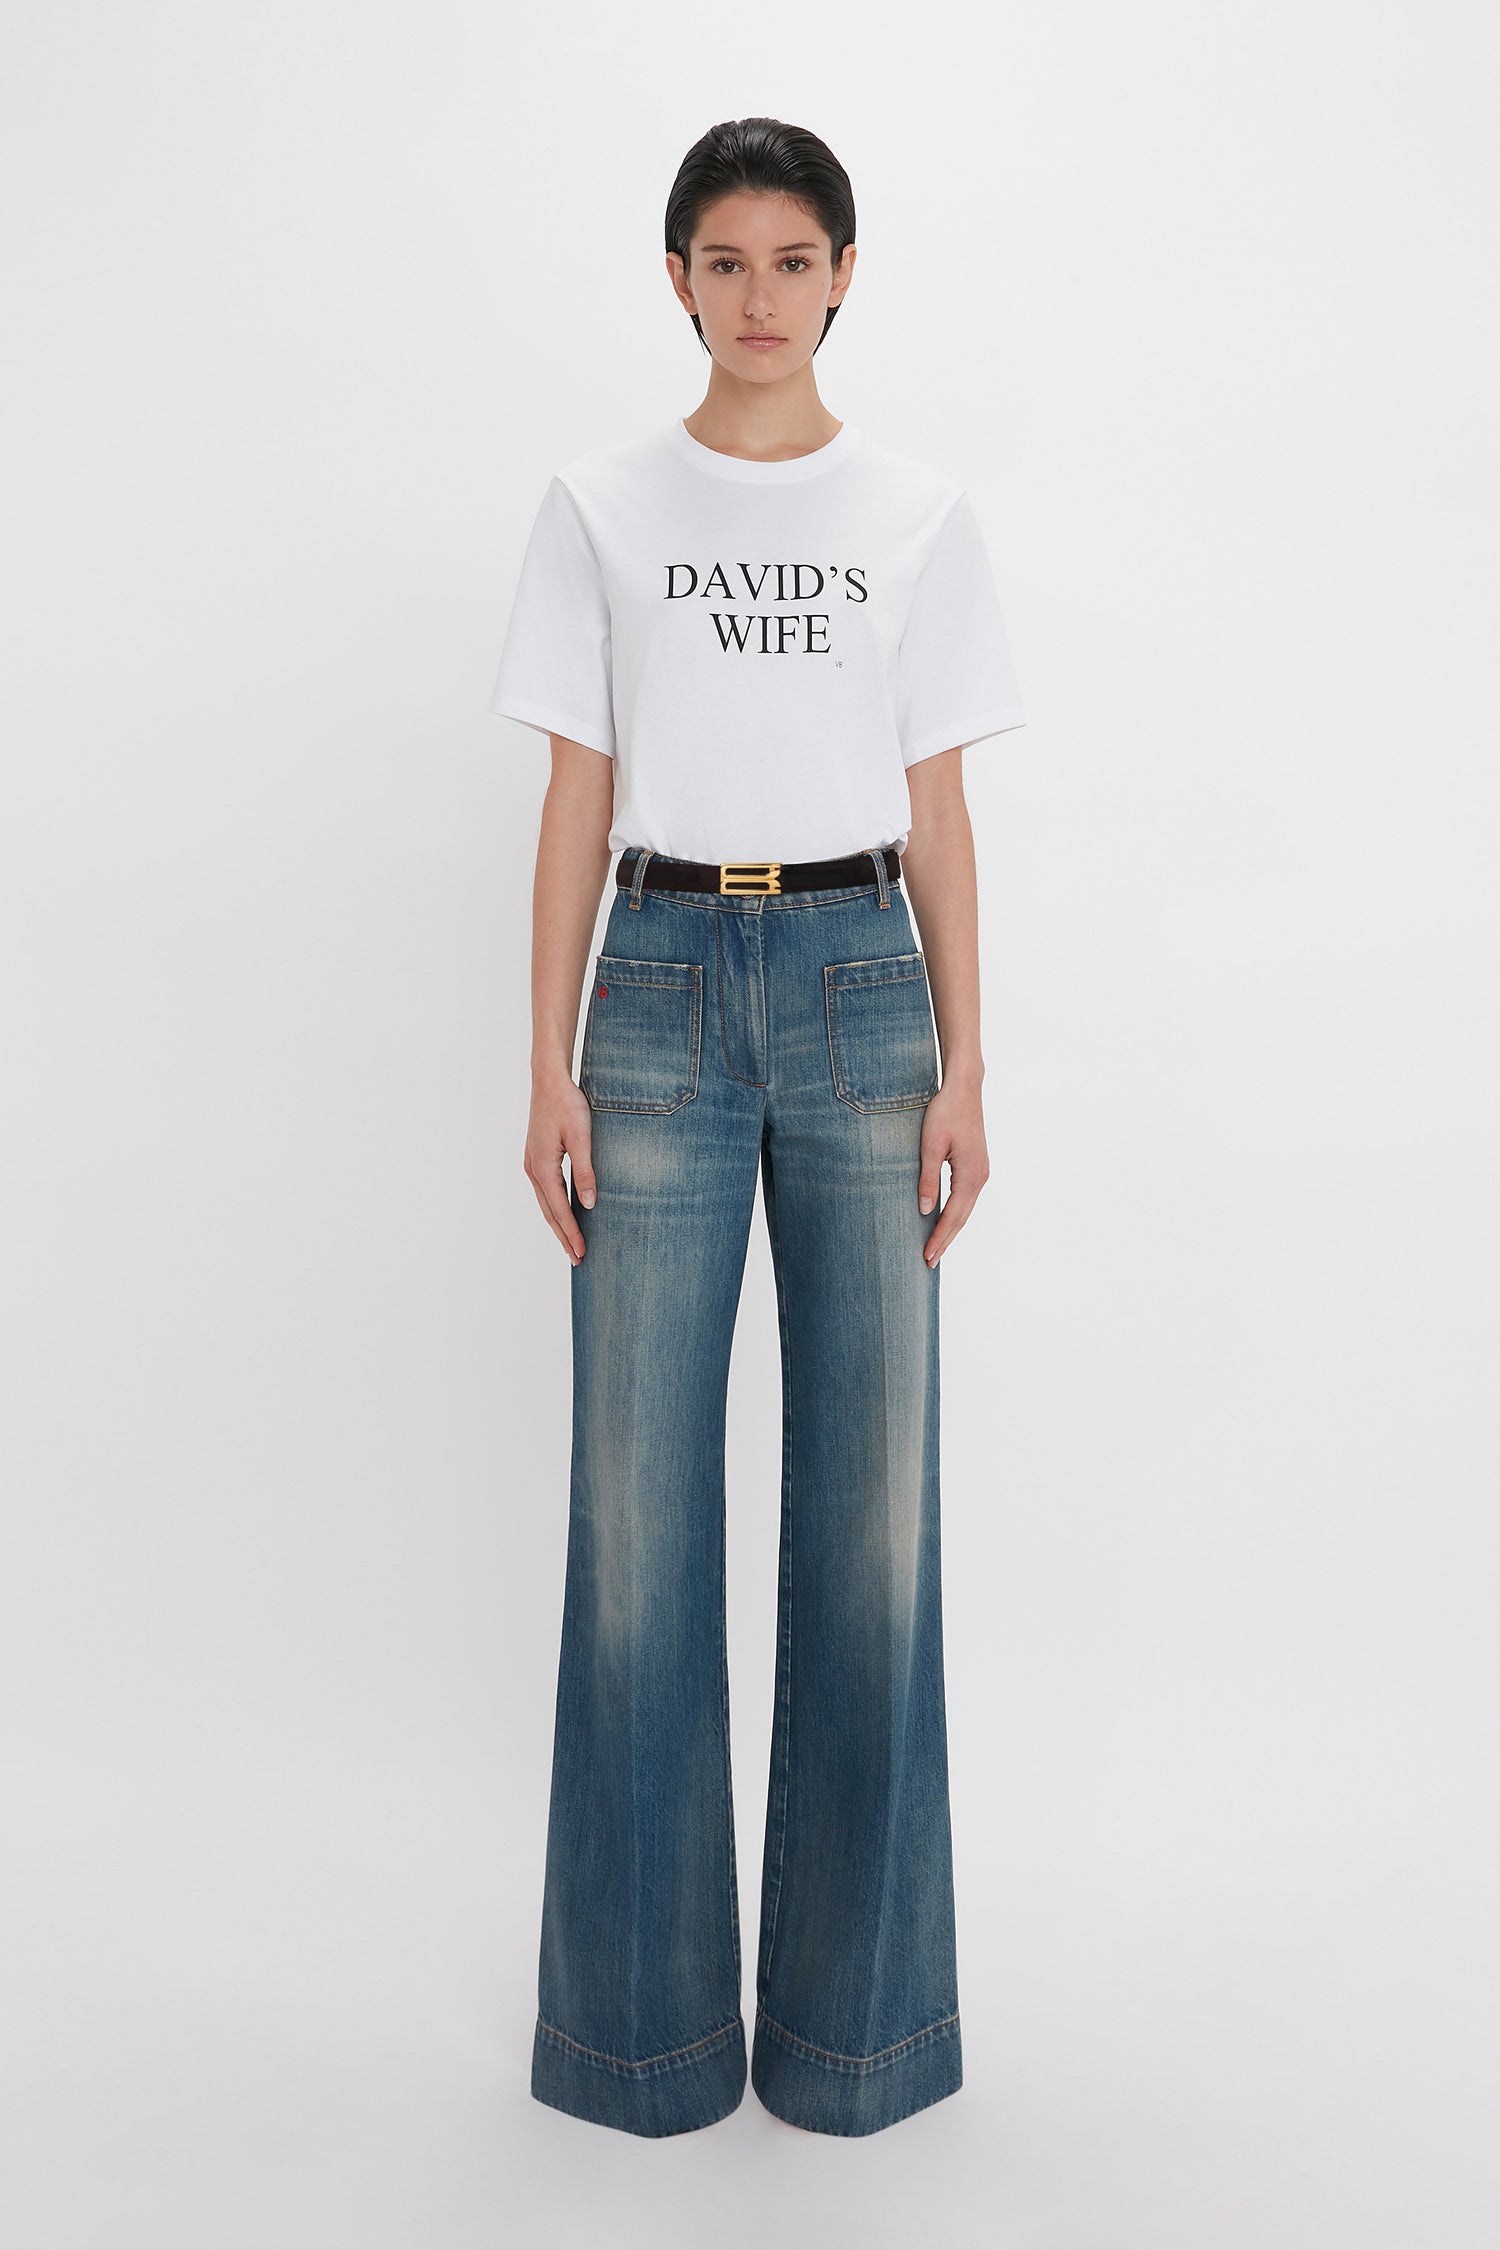 A woman wearing a white Victoria Beckham 'David's Wife' Slogan T-Shirt with "David's Wife" text and blue high-waisted, wide-leg jeans, paired with a black belt.